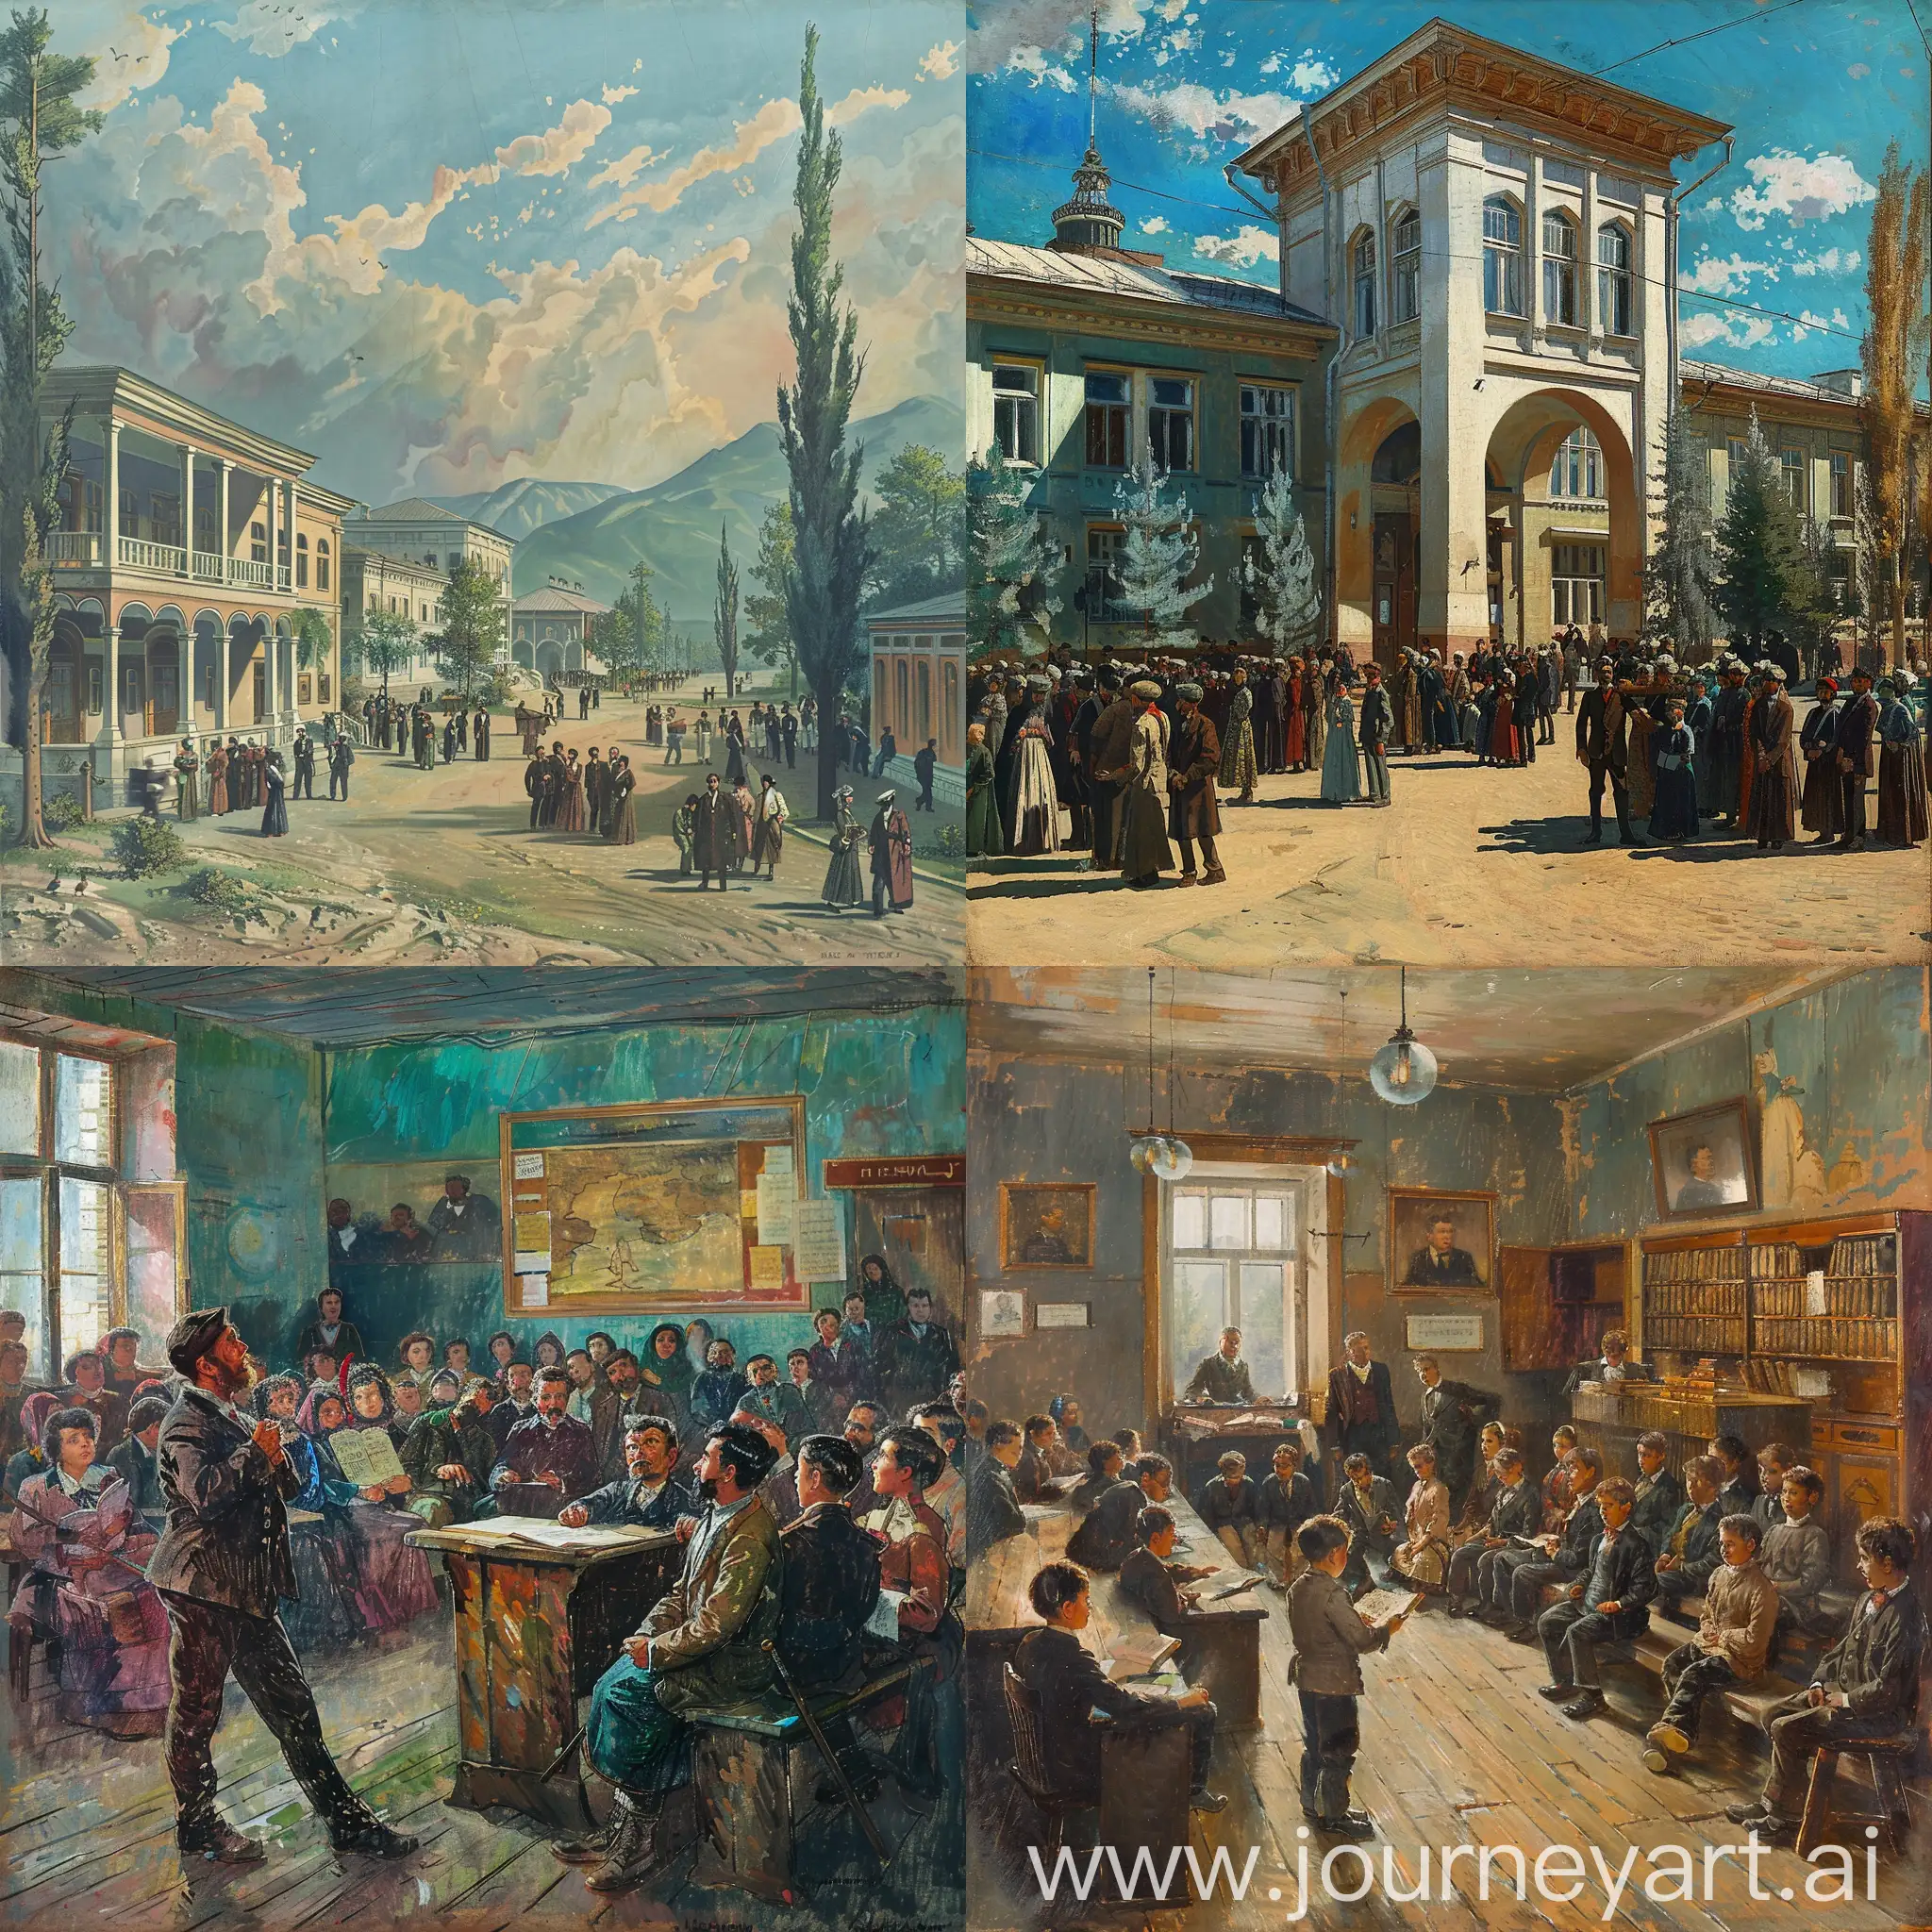 Historical-Educational-Activities-in-Kazakhstan-Early-19th-to-20th-Century